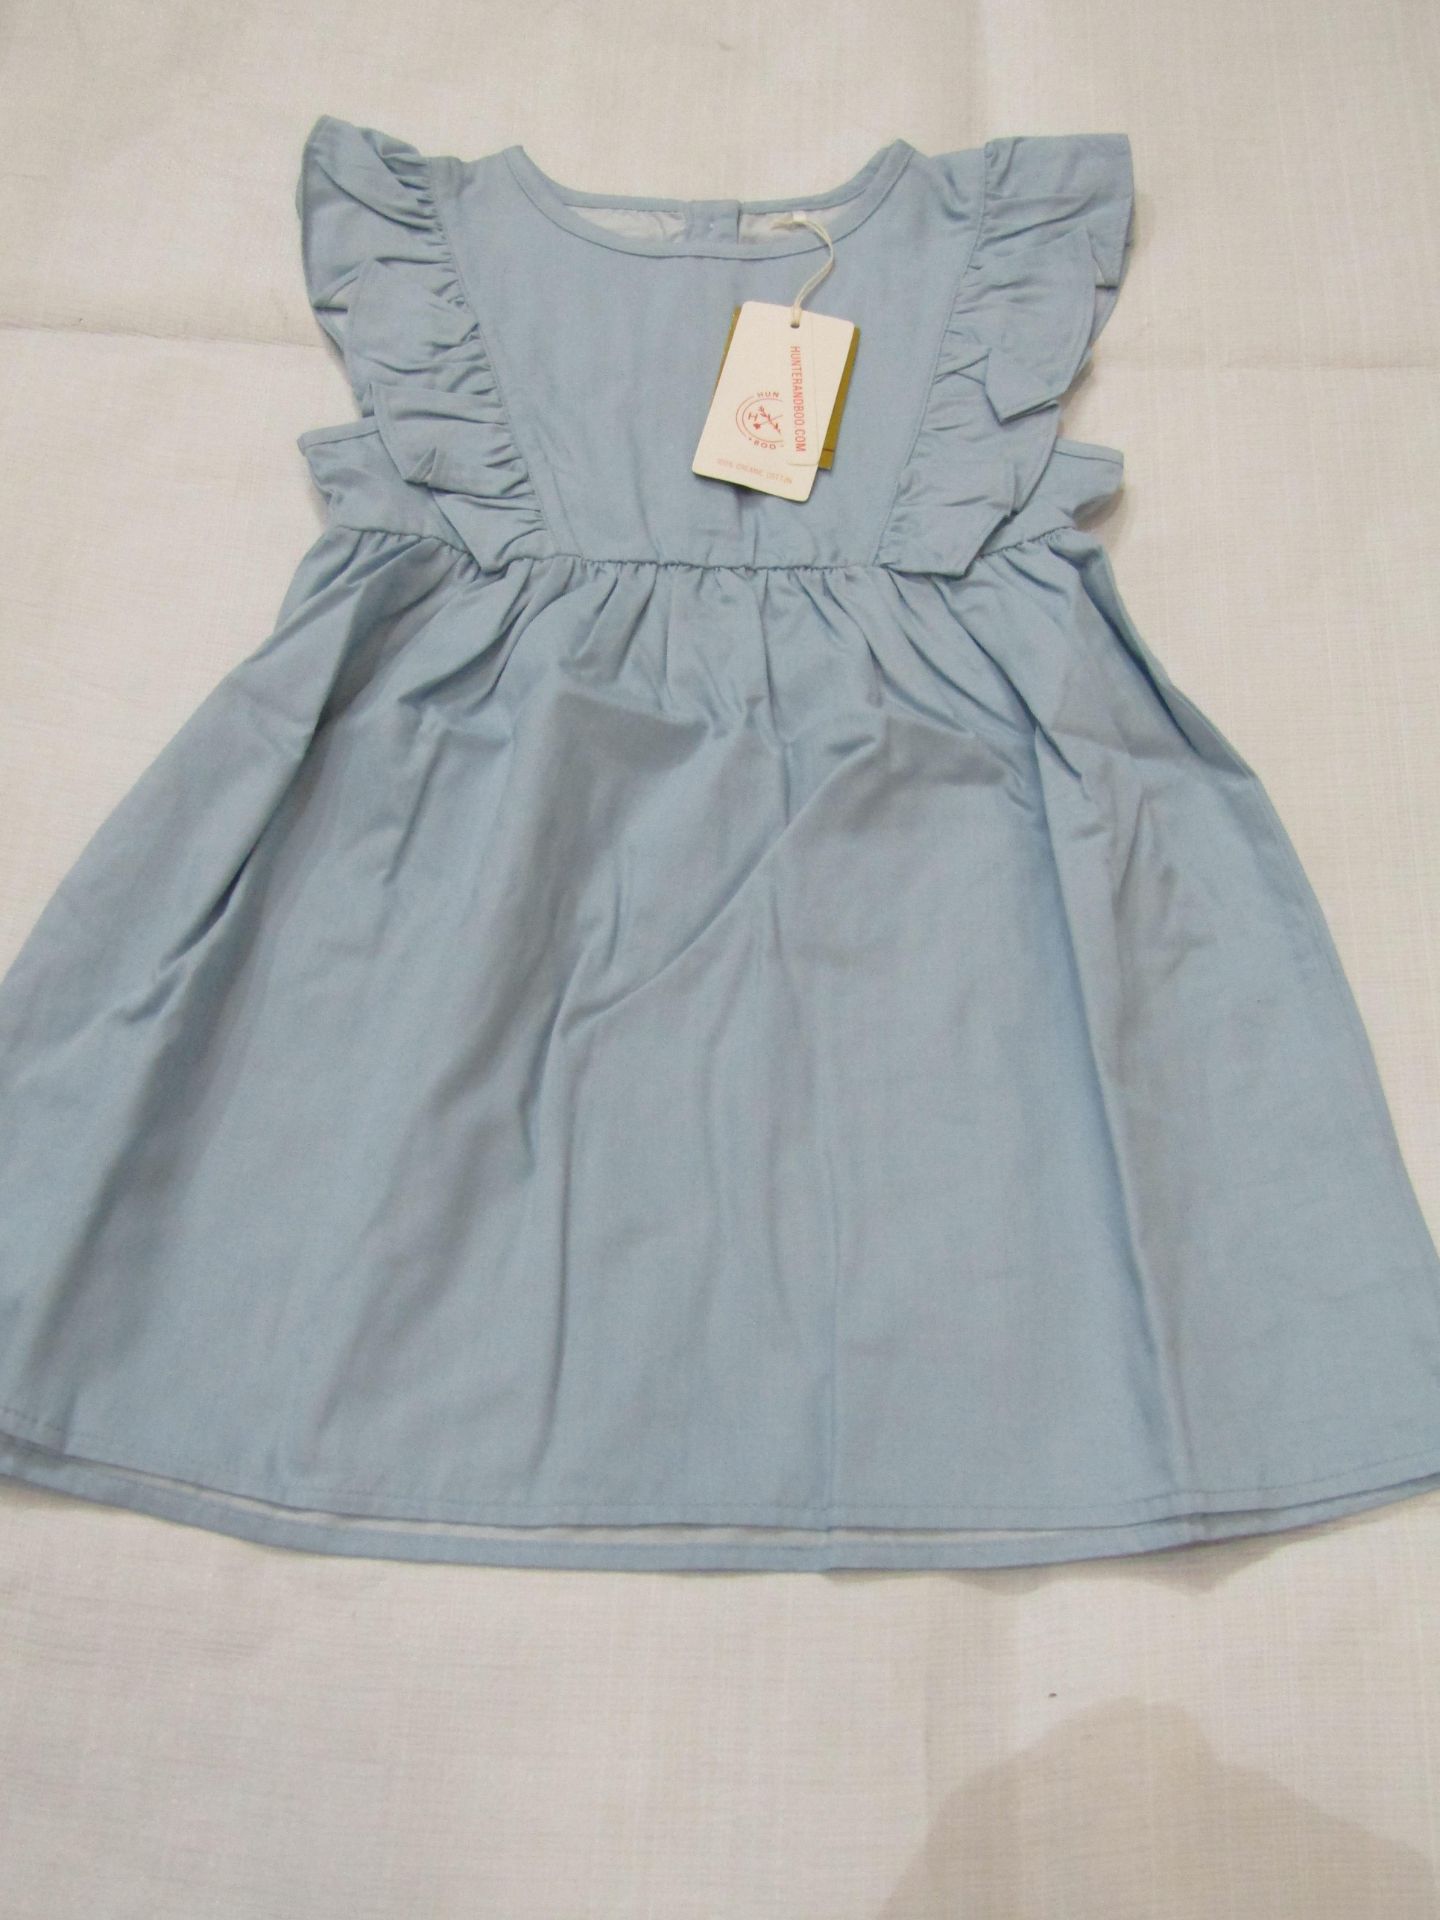 Hunter & Boo Chambray Frilled Dress Aged 3-4 yrs New & Packaged RRP £29